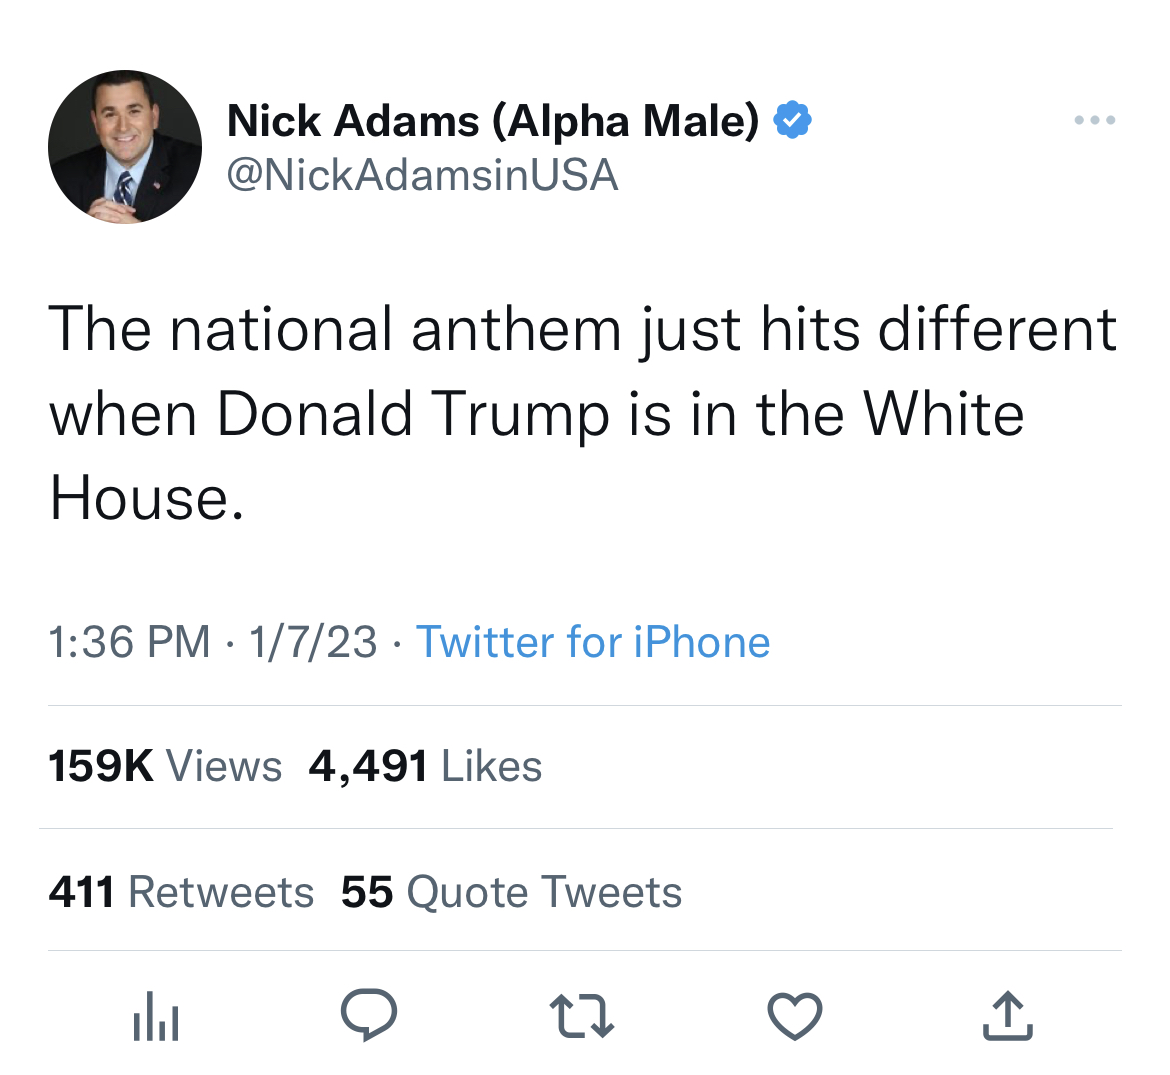 nick adams unhinged tweets - nick adams hooters tweet - Nick Adams Alpha Male Usa The national anthem just hits different when Donald Trump is in the White House. 1723 Twitter for iPhone Views 4,491 411 55 Quote Tweets da 27